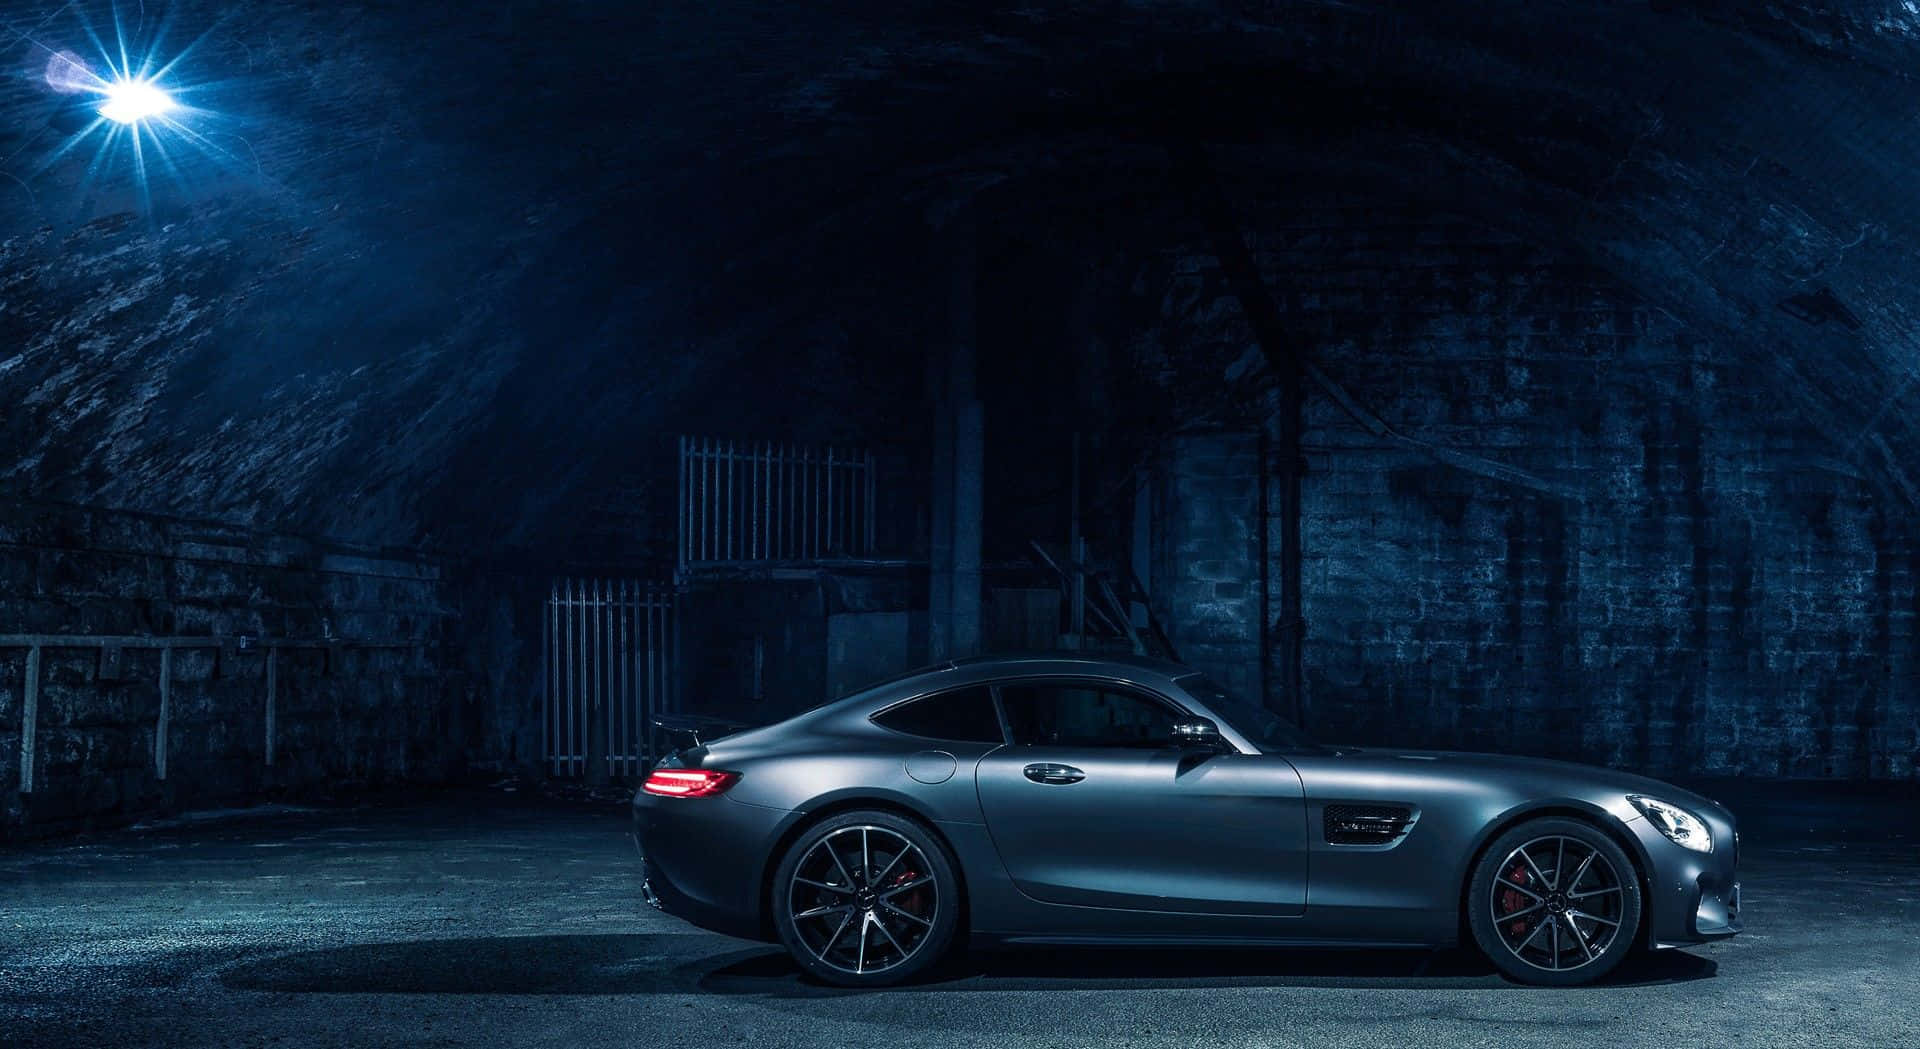 Mercedesamg Gt In Tunnel Would Be Translated As 